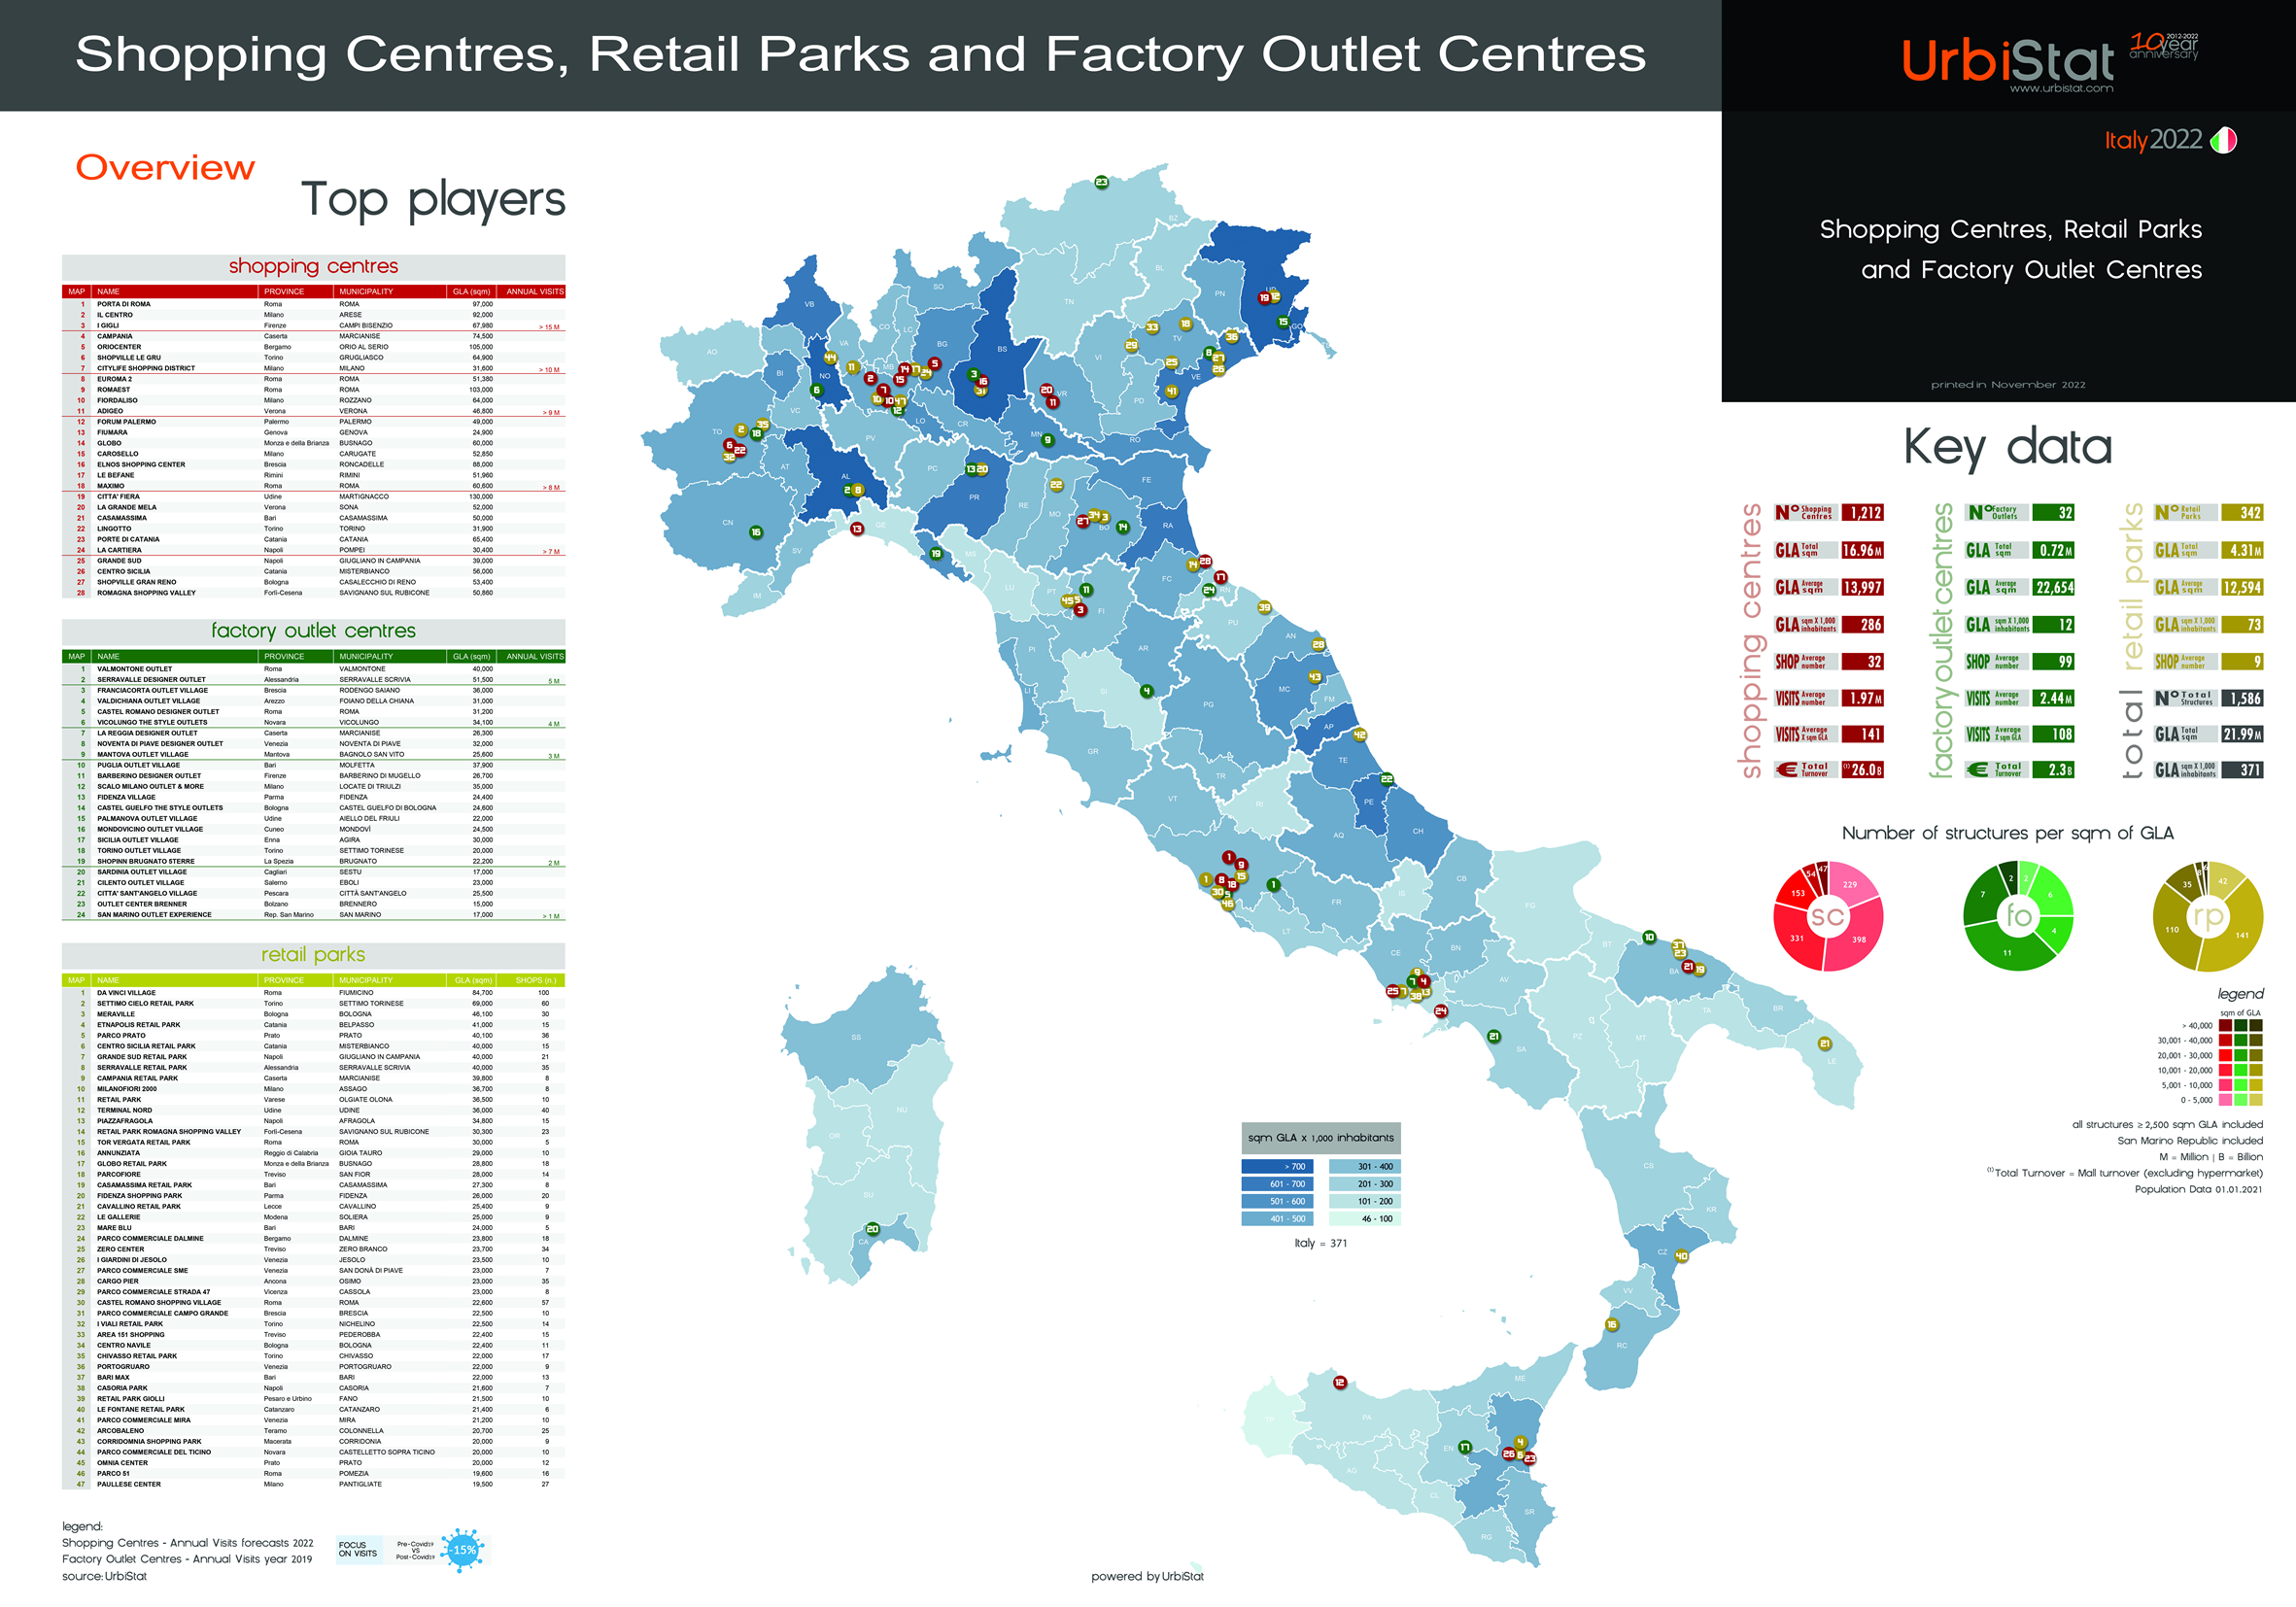 POSTER – Top Shopping centres, Retail parks and Factory outlet in Italy 2022